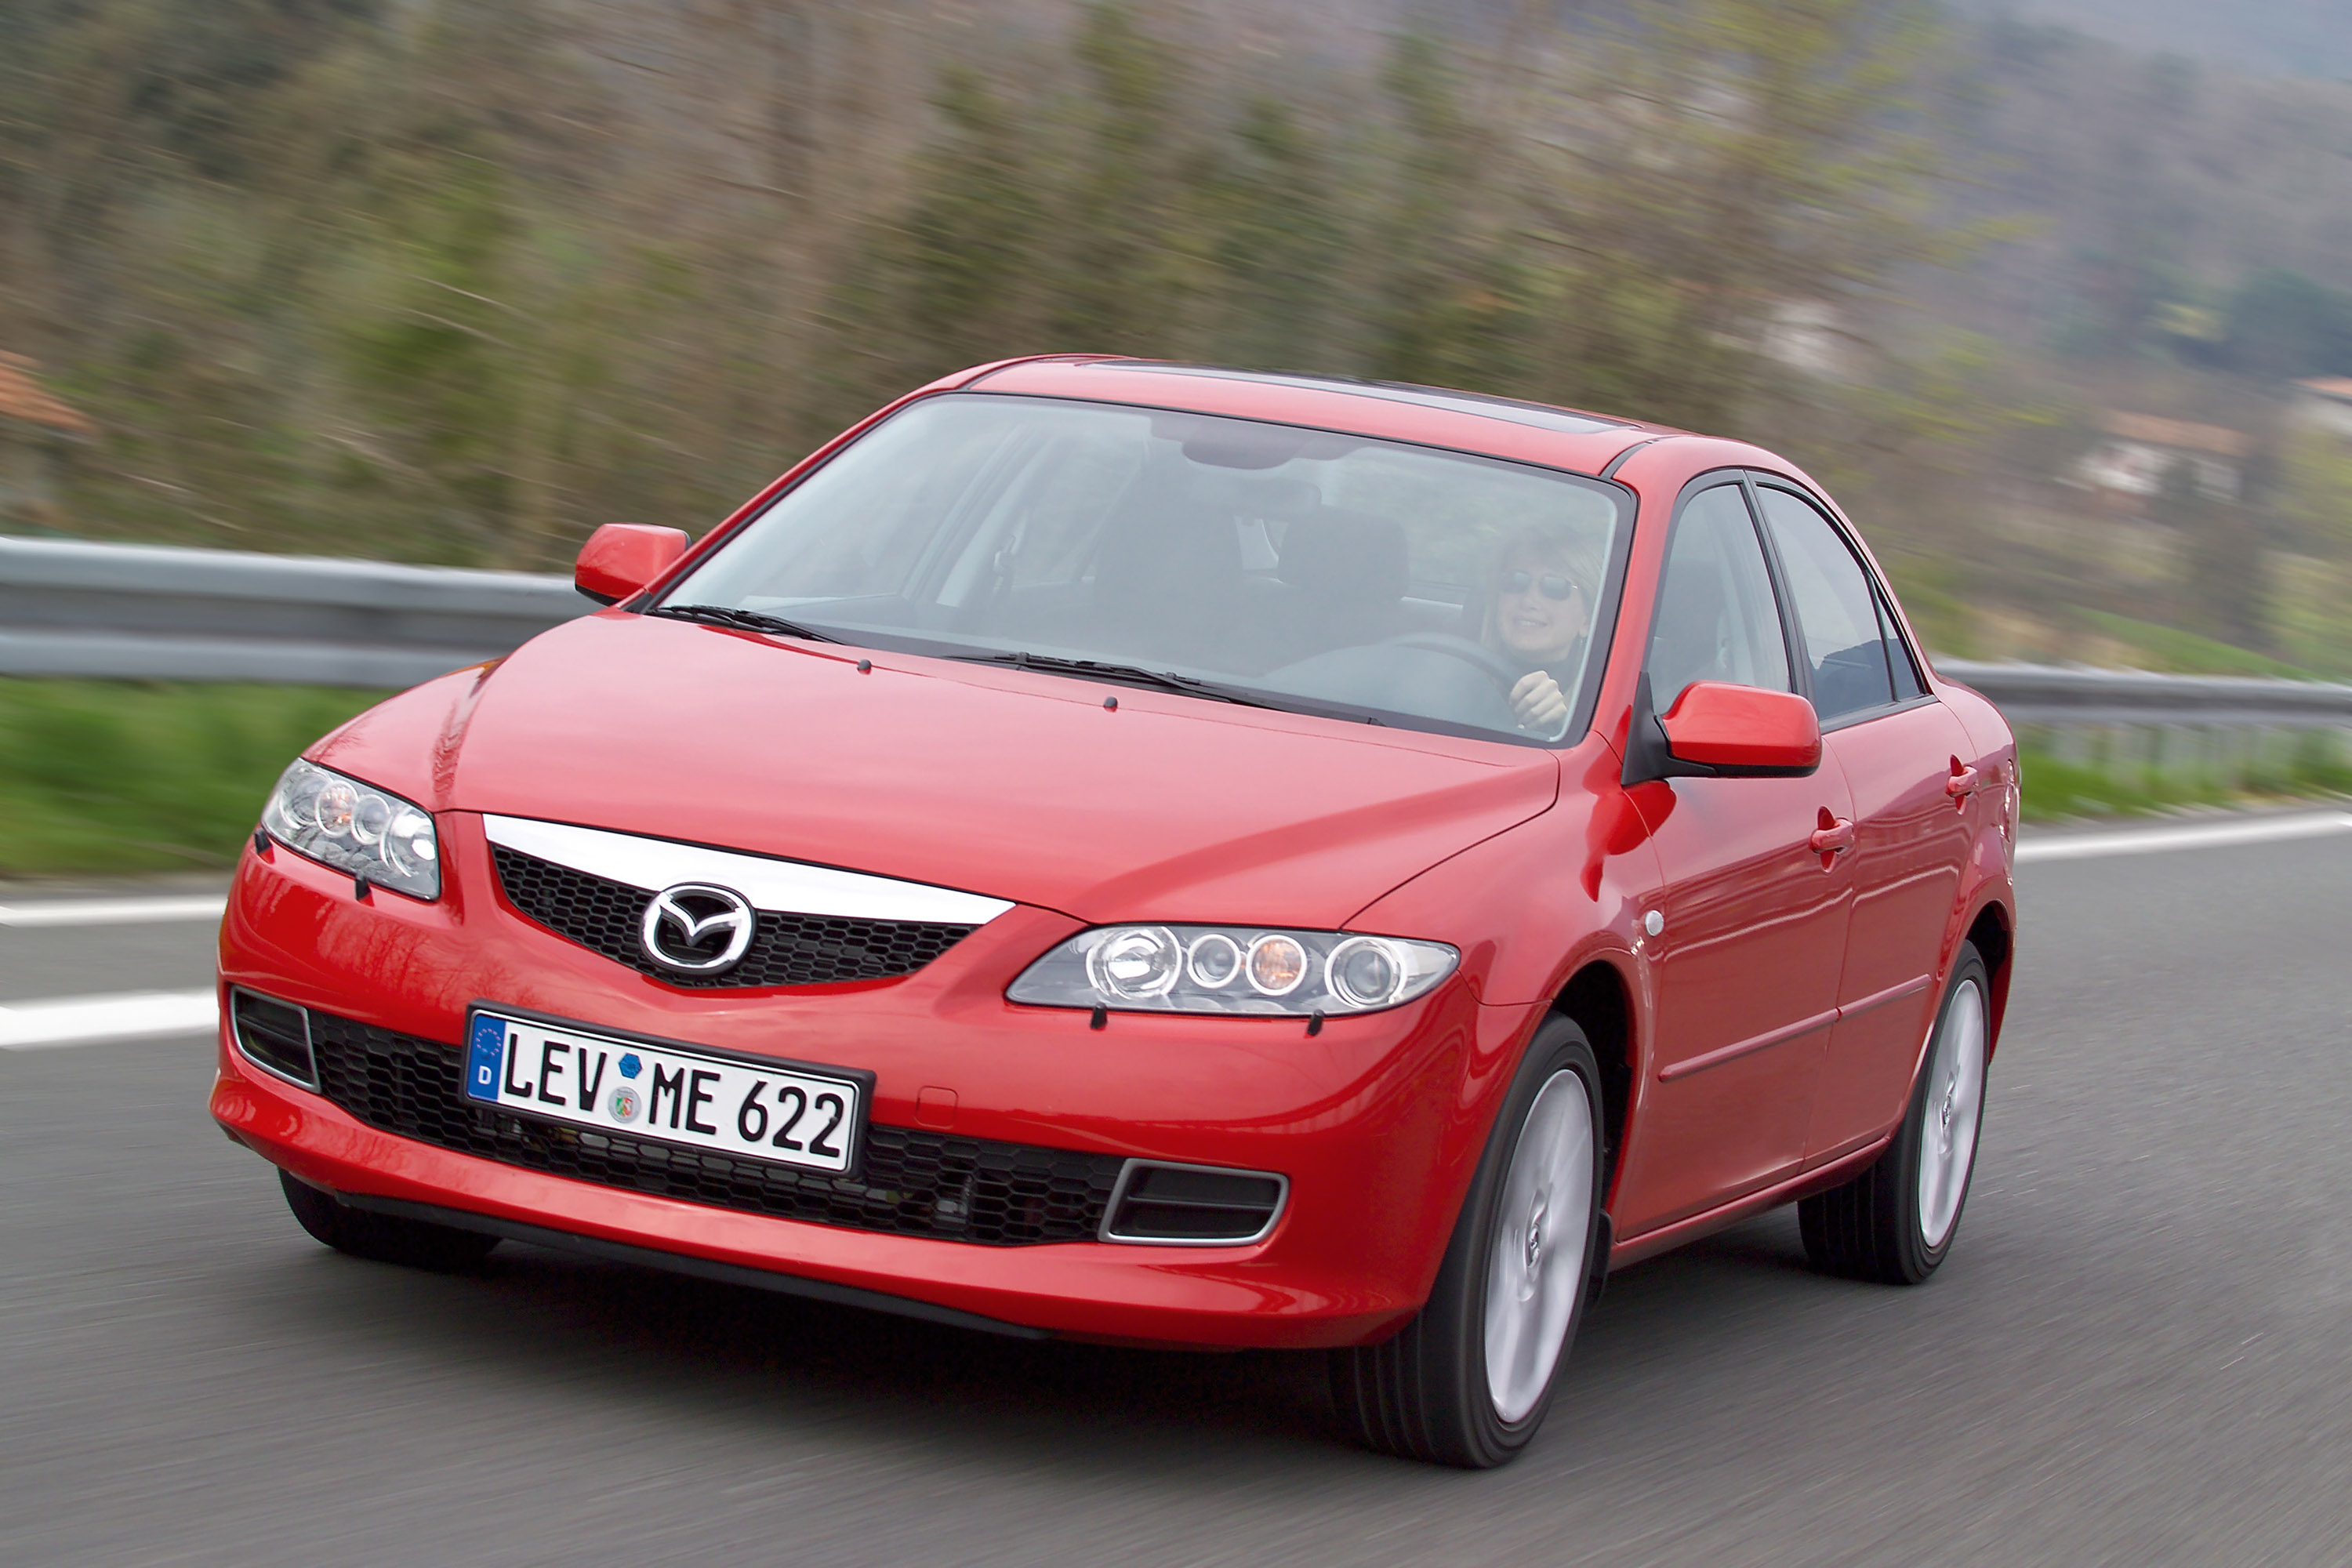 2005 Mazda 6 Facelift HD Pictures